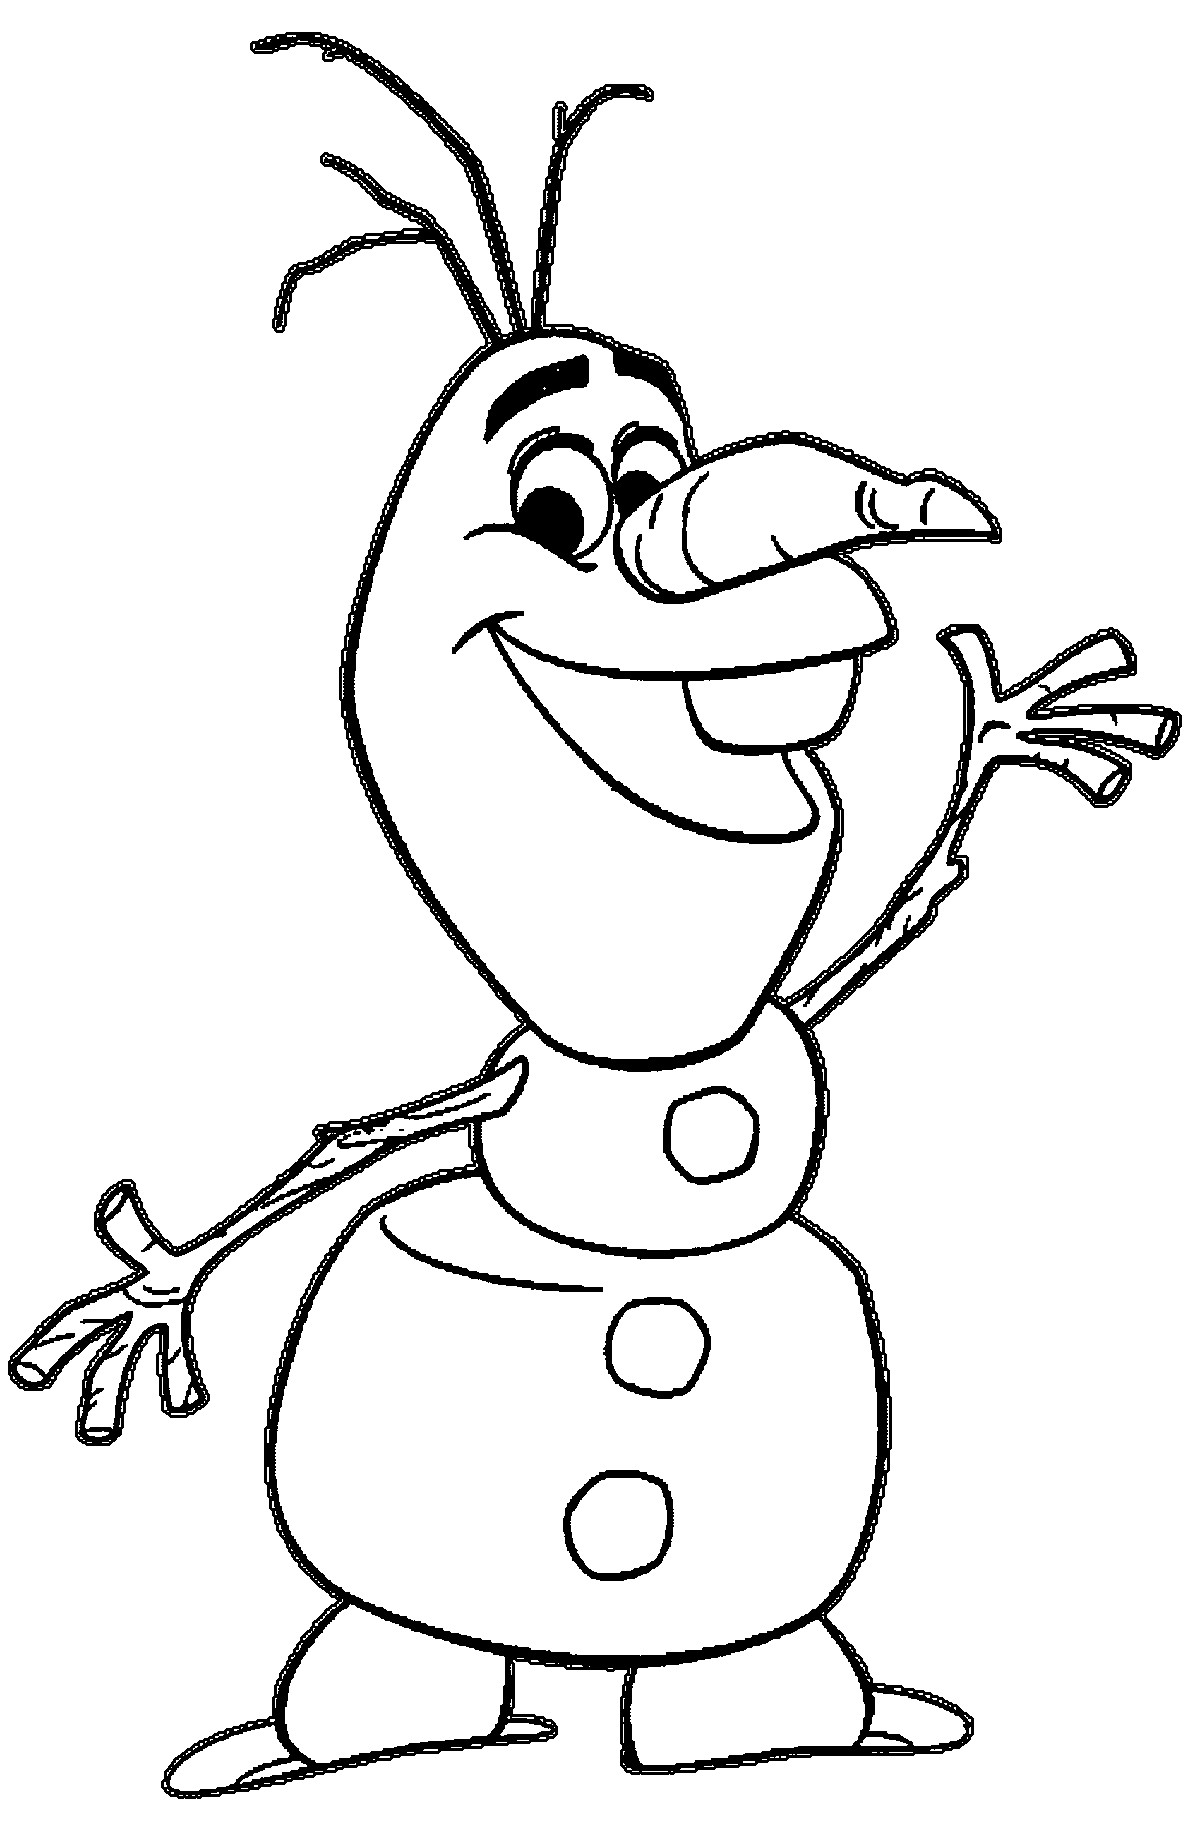 Olaf Printable Coloring Pages
 Olaf Waving Coloring Page